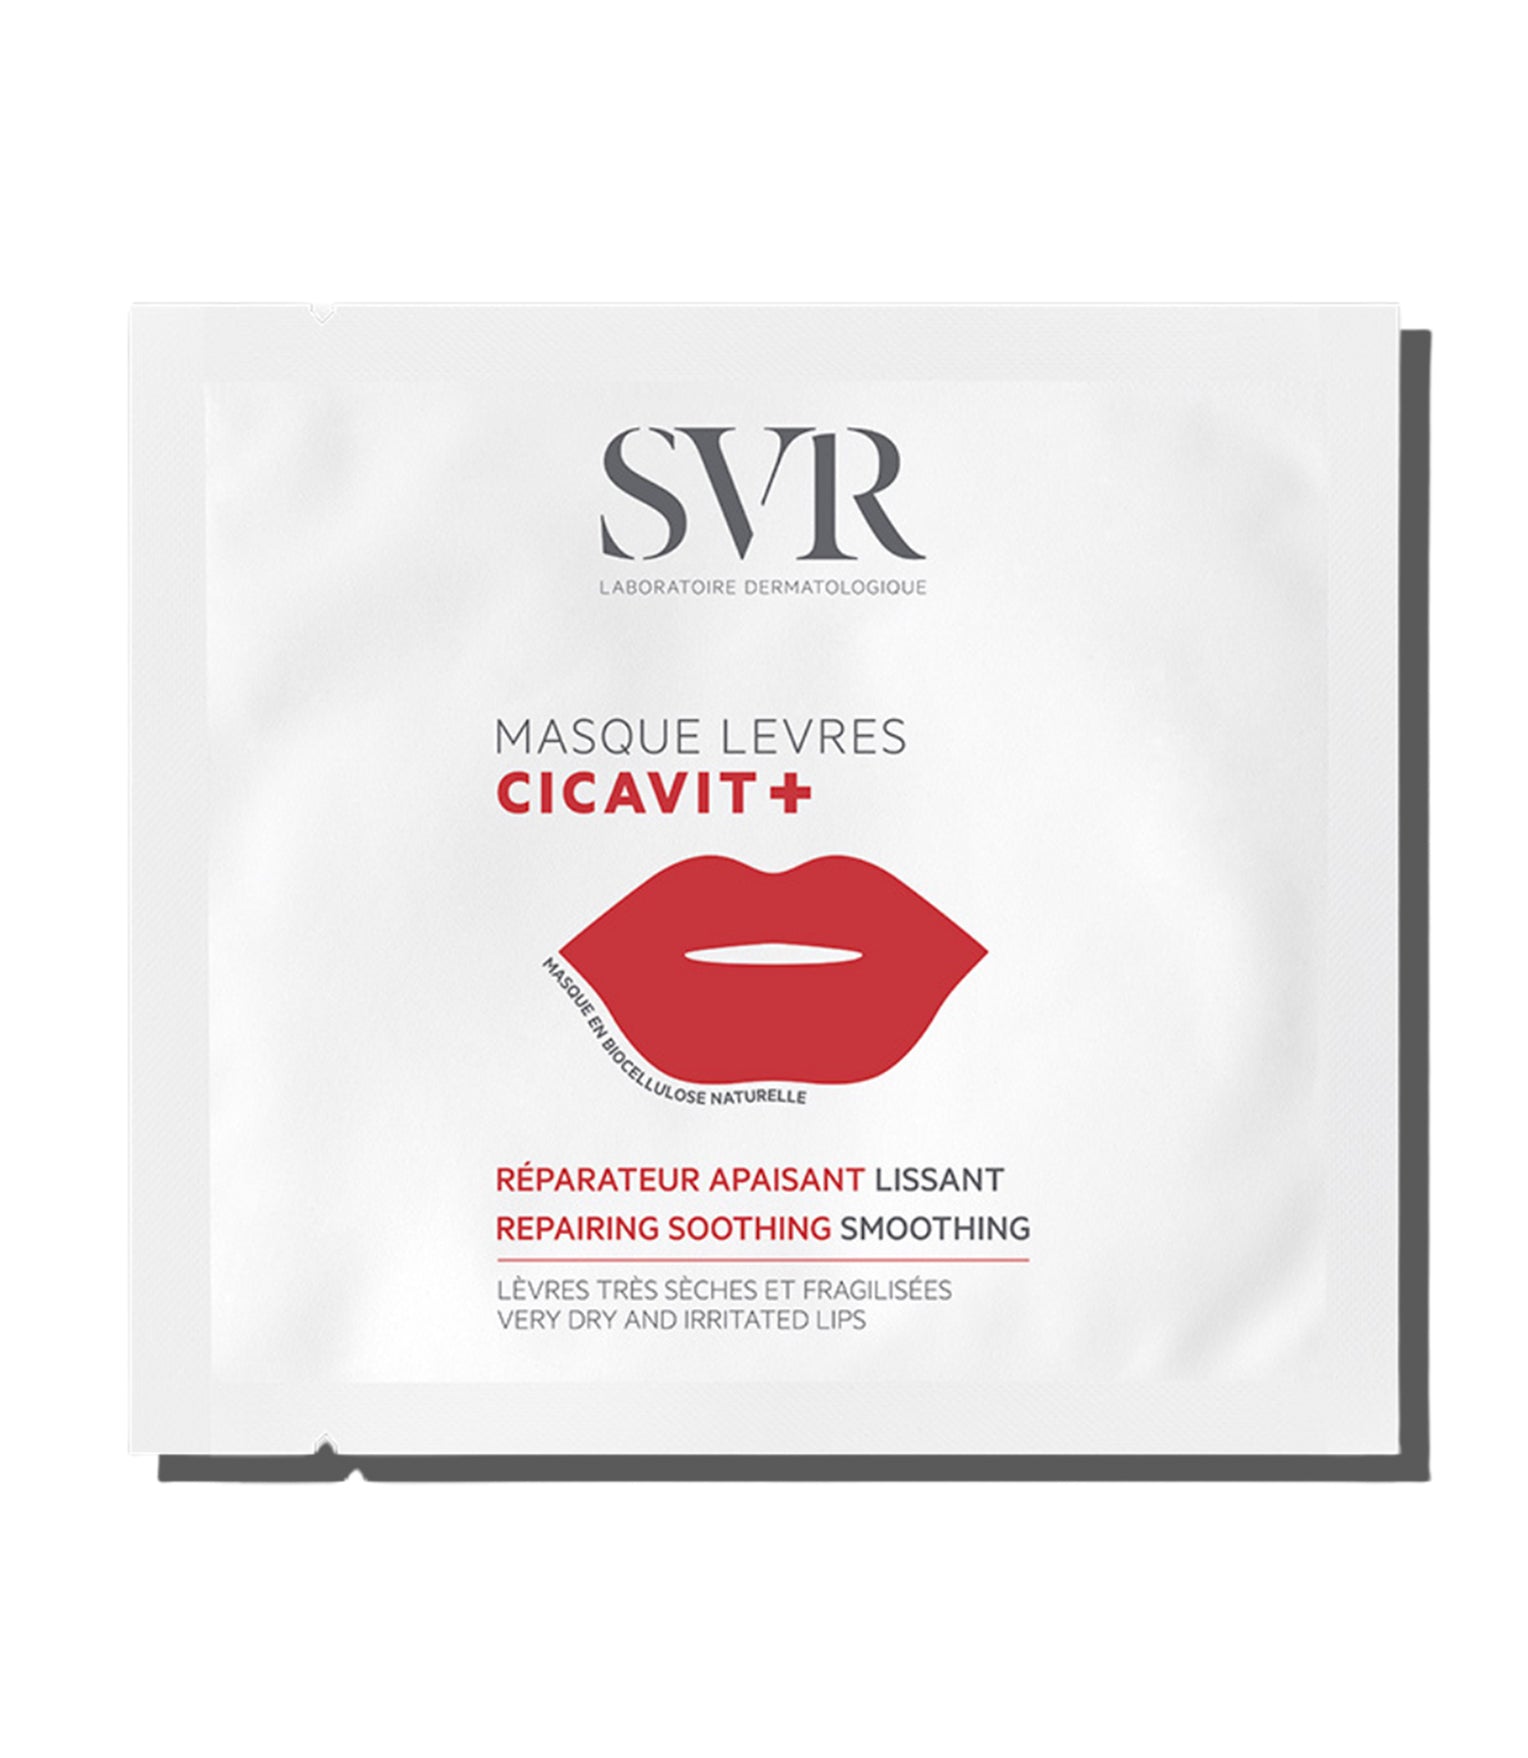 CICAVIT+ Smoothing & Soothing Lip Mask 5ml when you spend $69 on SVR - French Beauty Co.